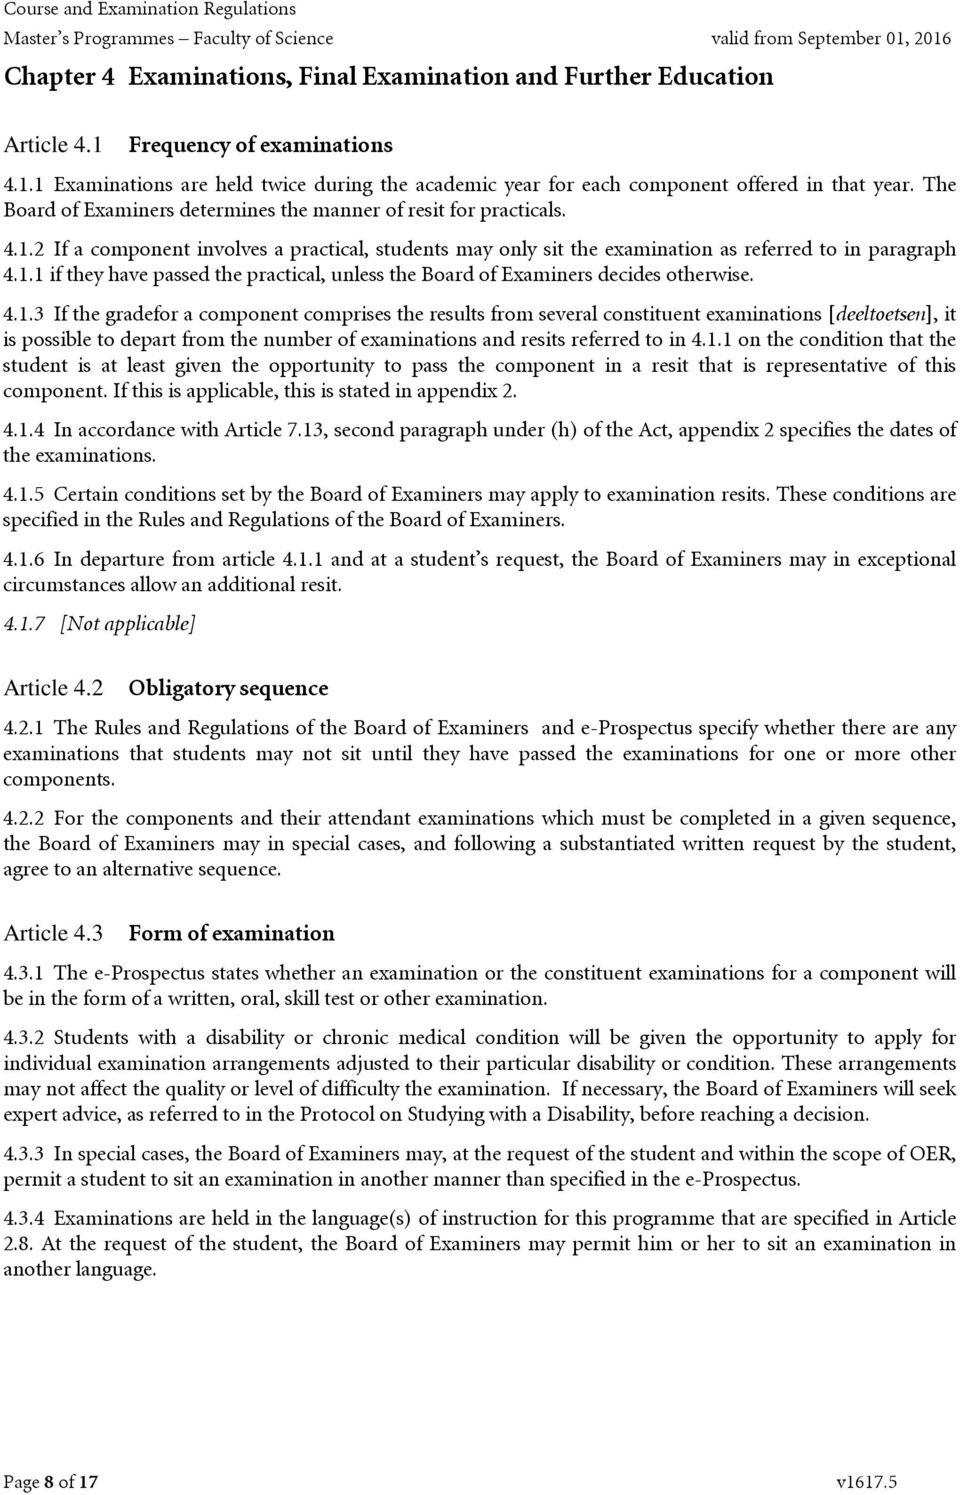 4.1.3 If the gradefor a component comprises the results from several constituent examinations [deeltoetsen], it is possible to depart from the number of examinations and resits referred to in 4.1.1 on the condition that the student is at least given the opportunity to pass the component in a resit that is representative of this component.